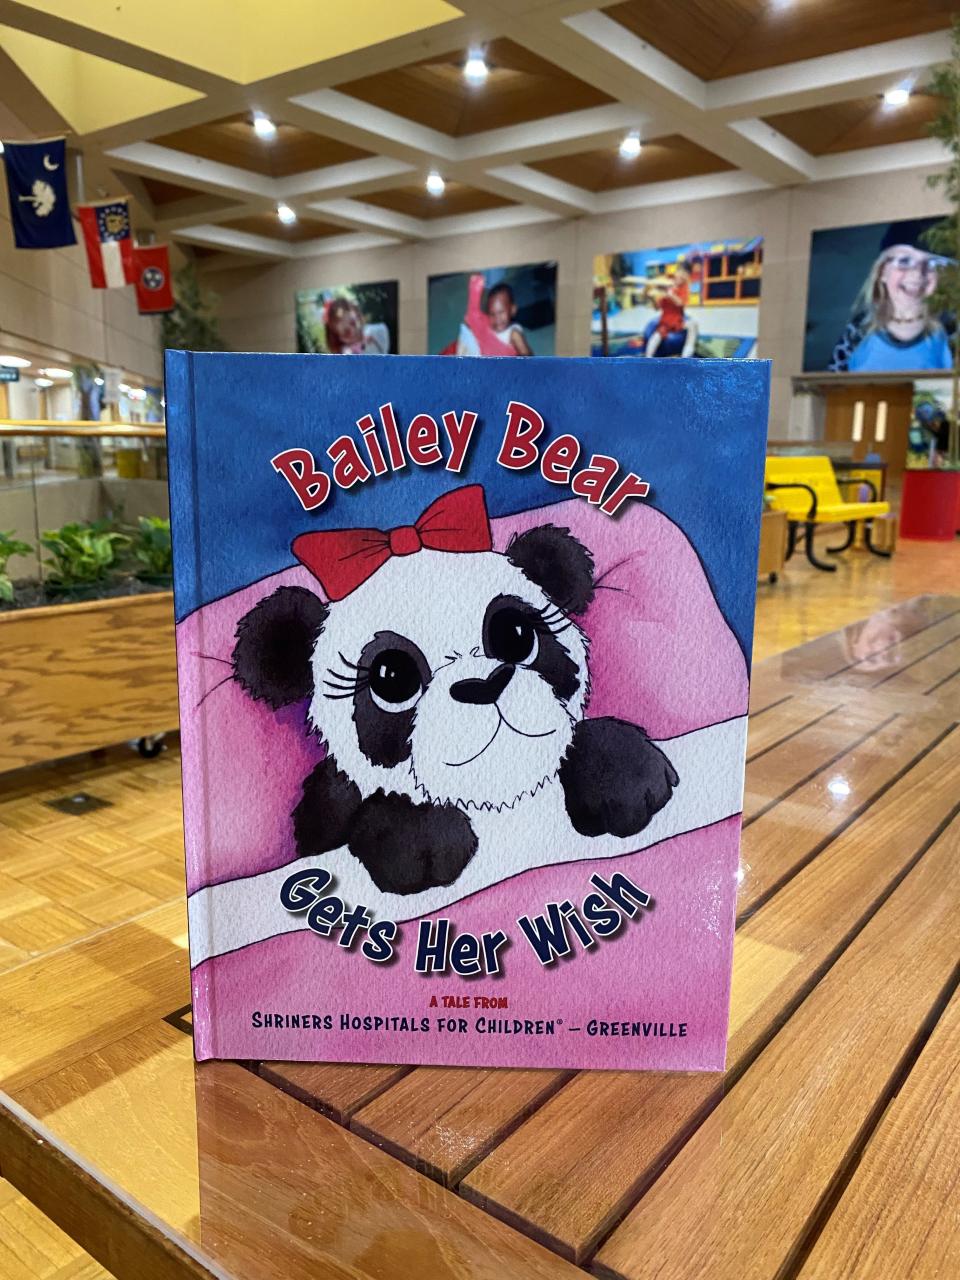 "Bailey Bear Get's Her Wish"- A tale from Shriners Hospitals for Children